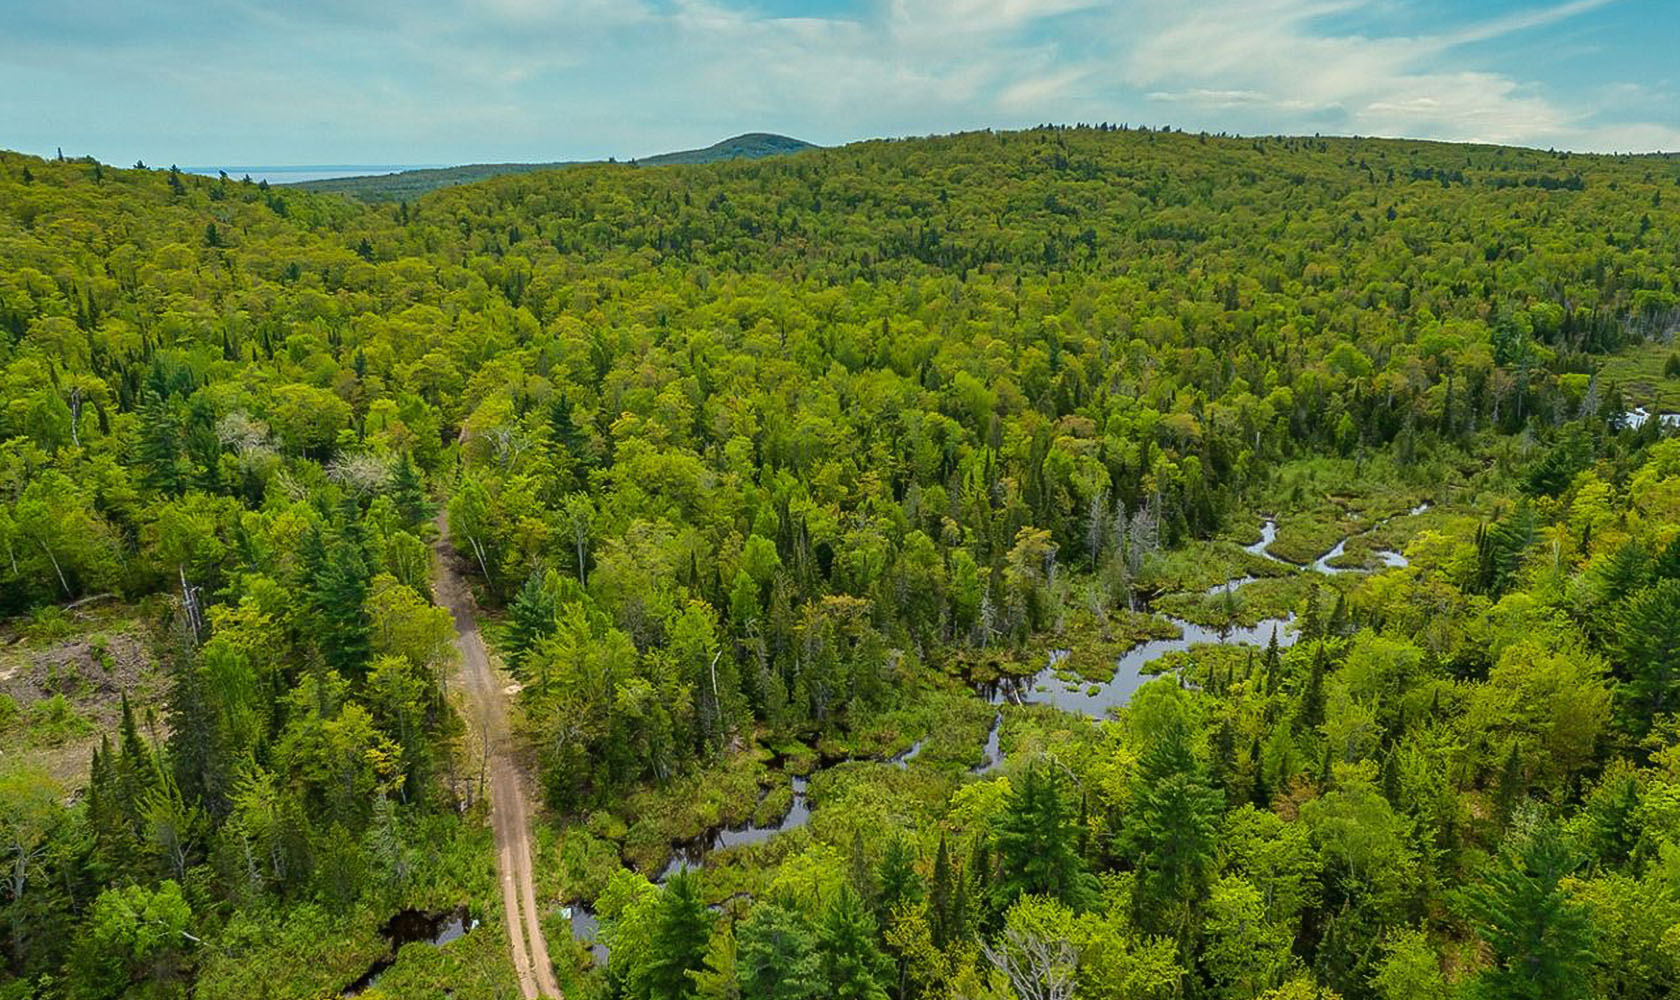 Aerial view of the Keweenaw Peninsula with a river and road crisscrossing each other in the middle of the green lush forest.